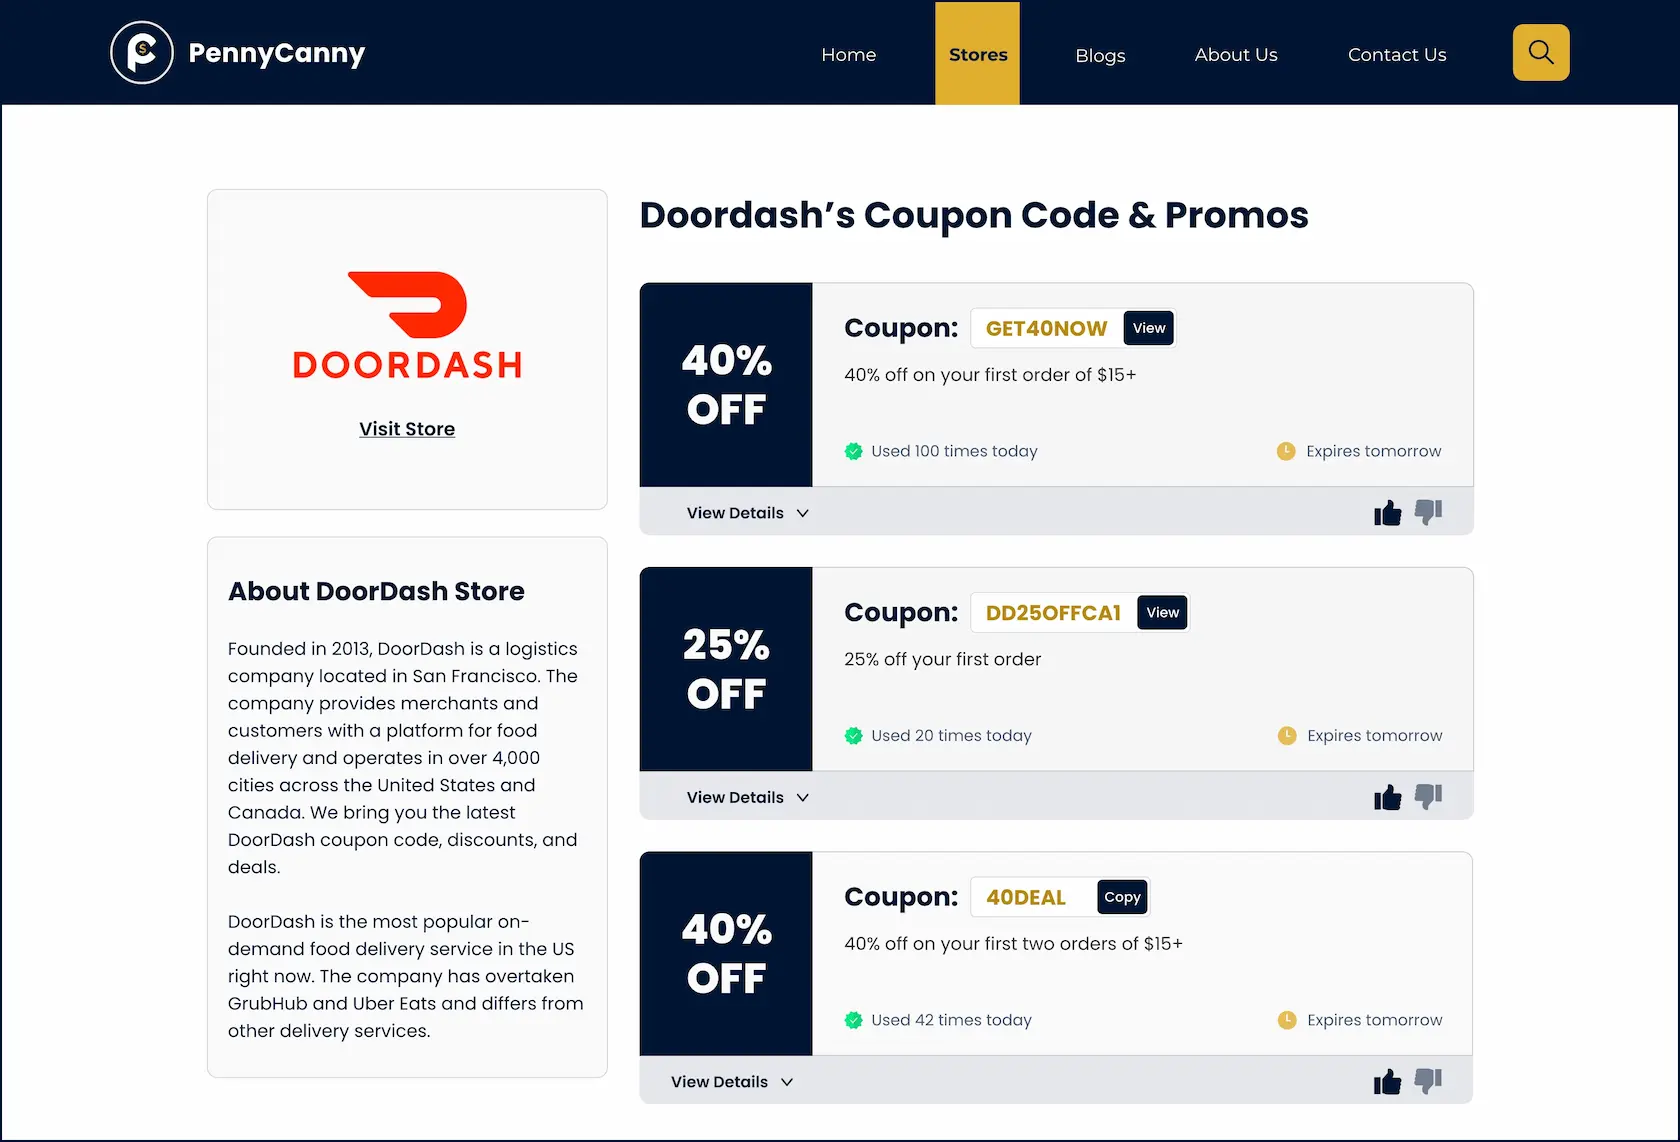 Can You Use Subway Coupons On DoorDash? - PennyCanny